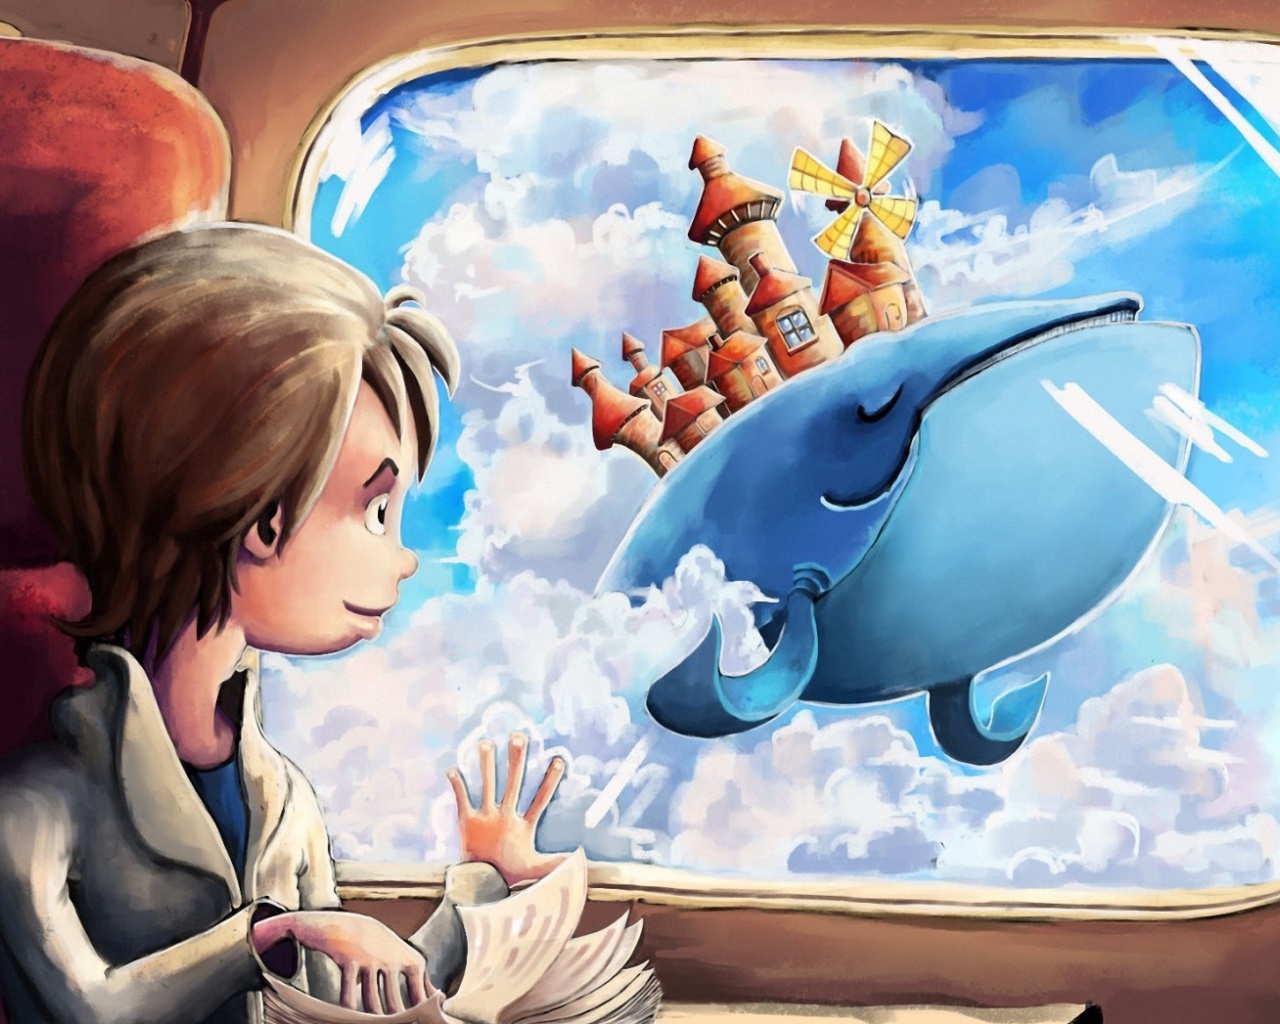 Fantasy Boy and Whale wallpaper 1280x1024